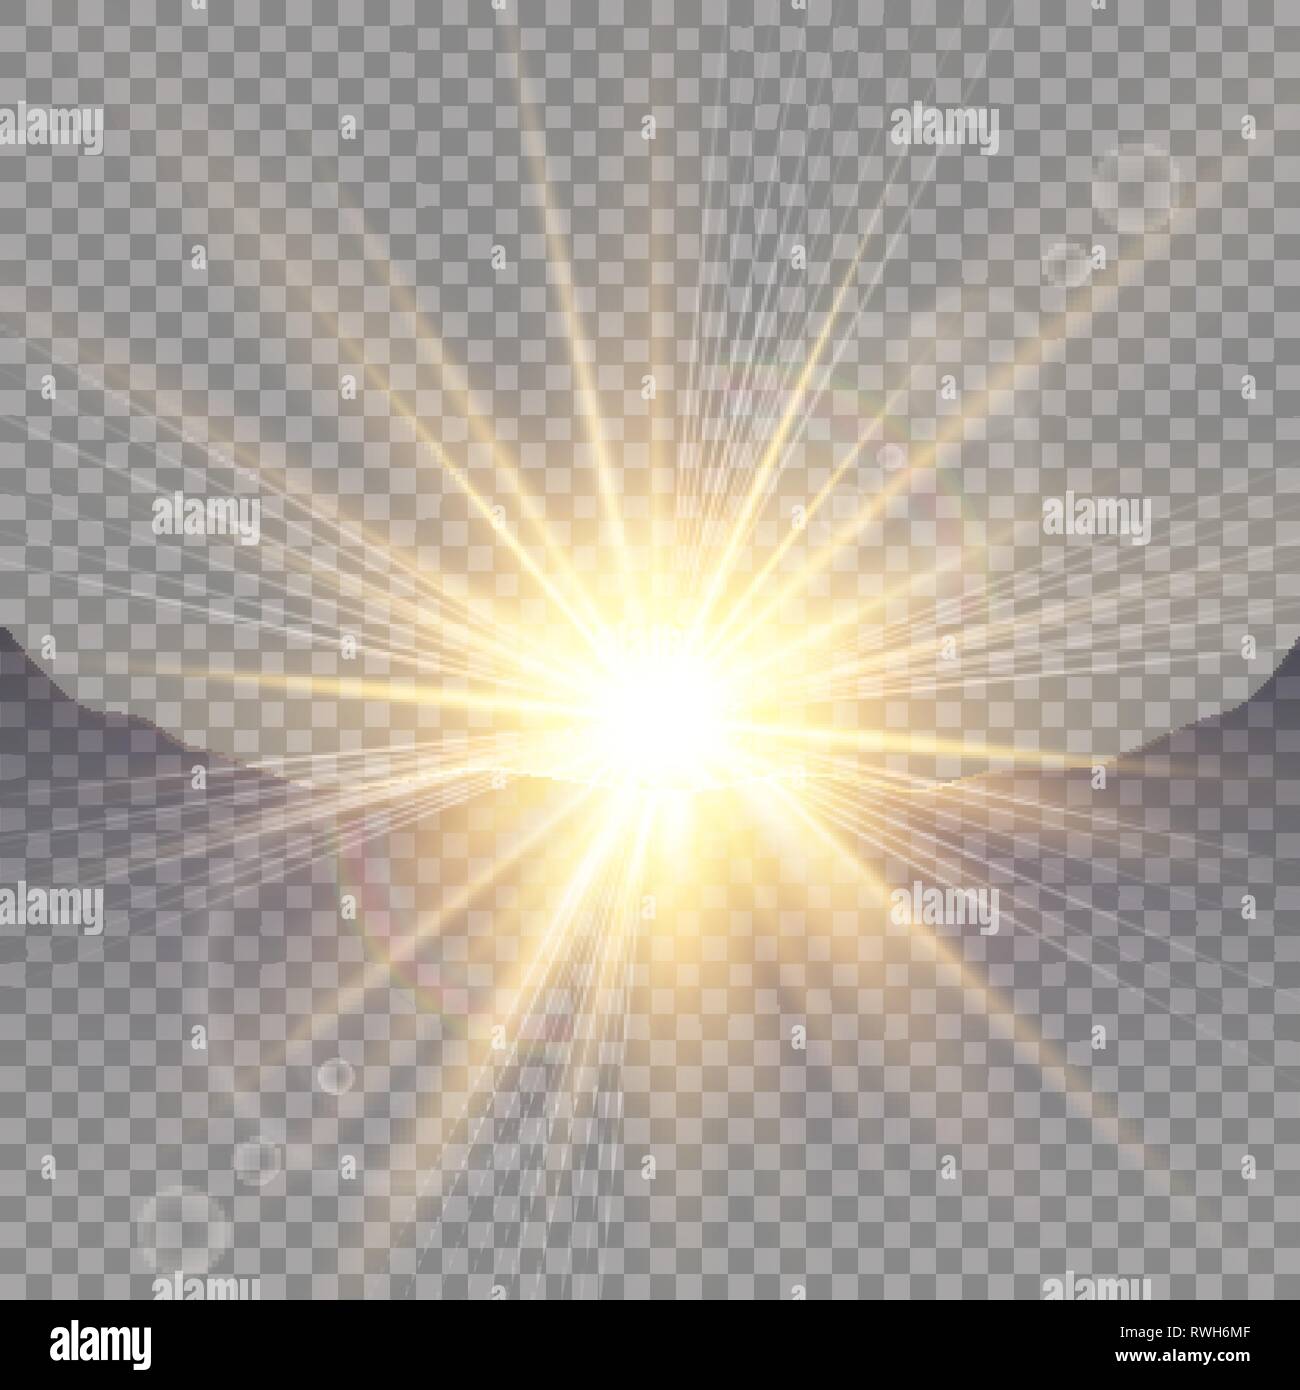 Sunrise over the mountains, dawn. Vector transparent sunlight. Special lens flare light effect. Stock Vector